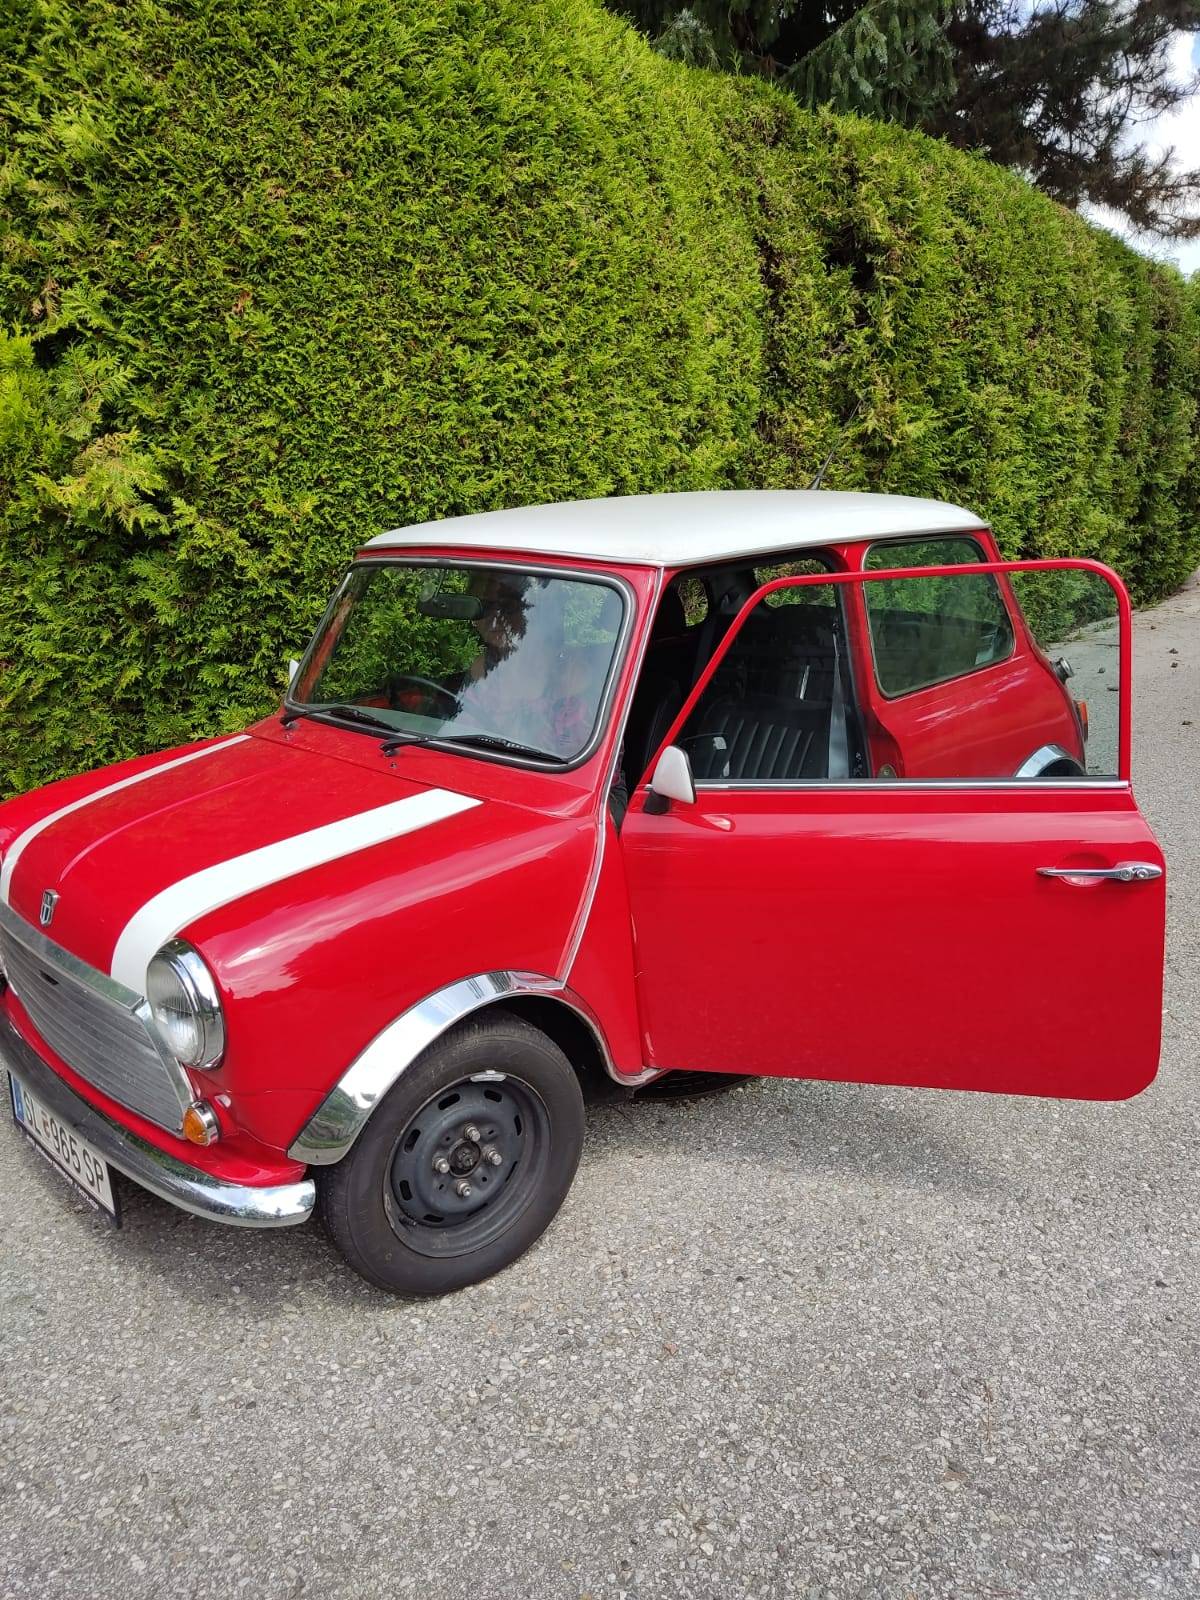 For Sale: Rover Mini Cooper 1,3 (1990) offered for £10,887